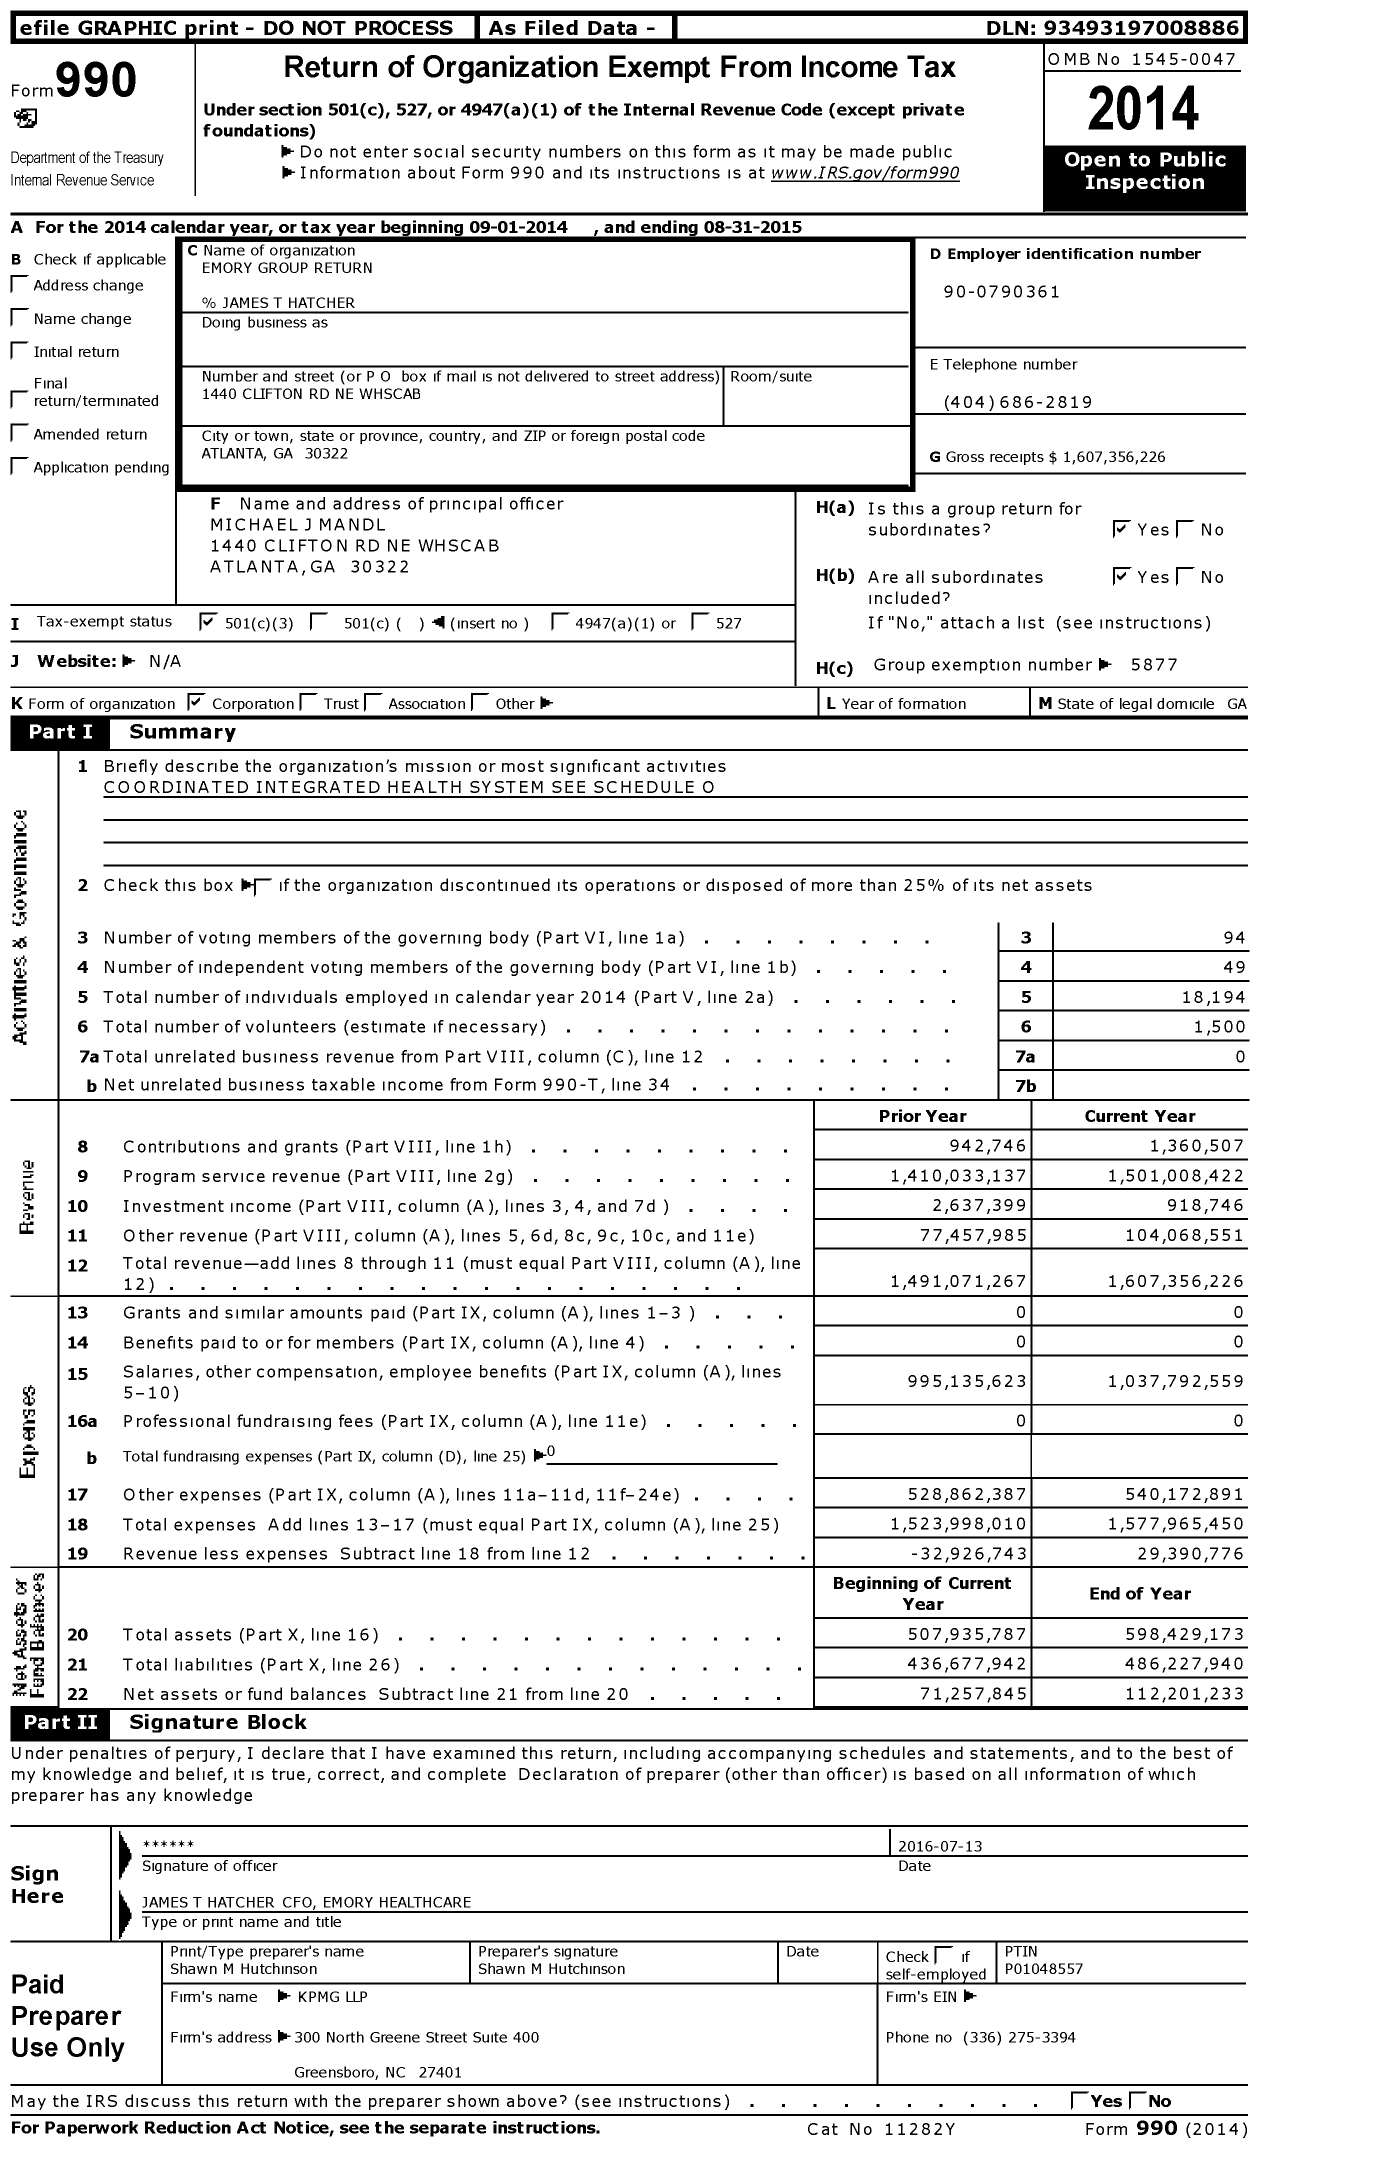 Image of first page of 2014 Form 990 for Emory Group Return